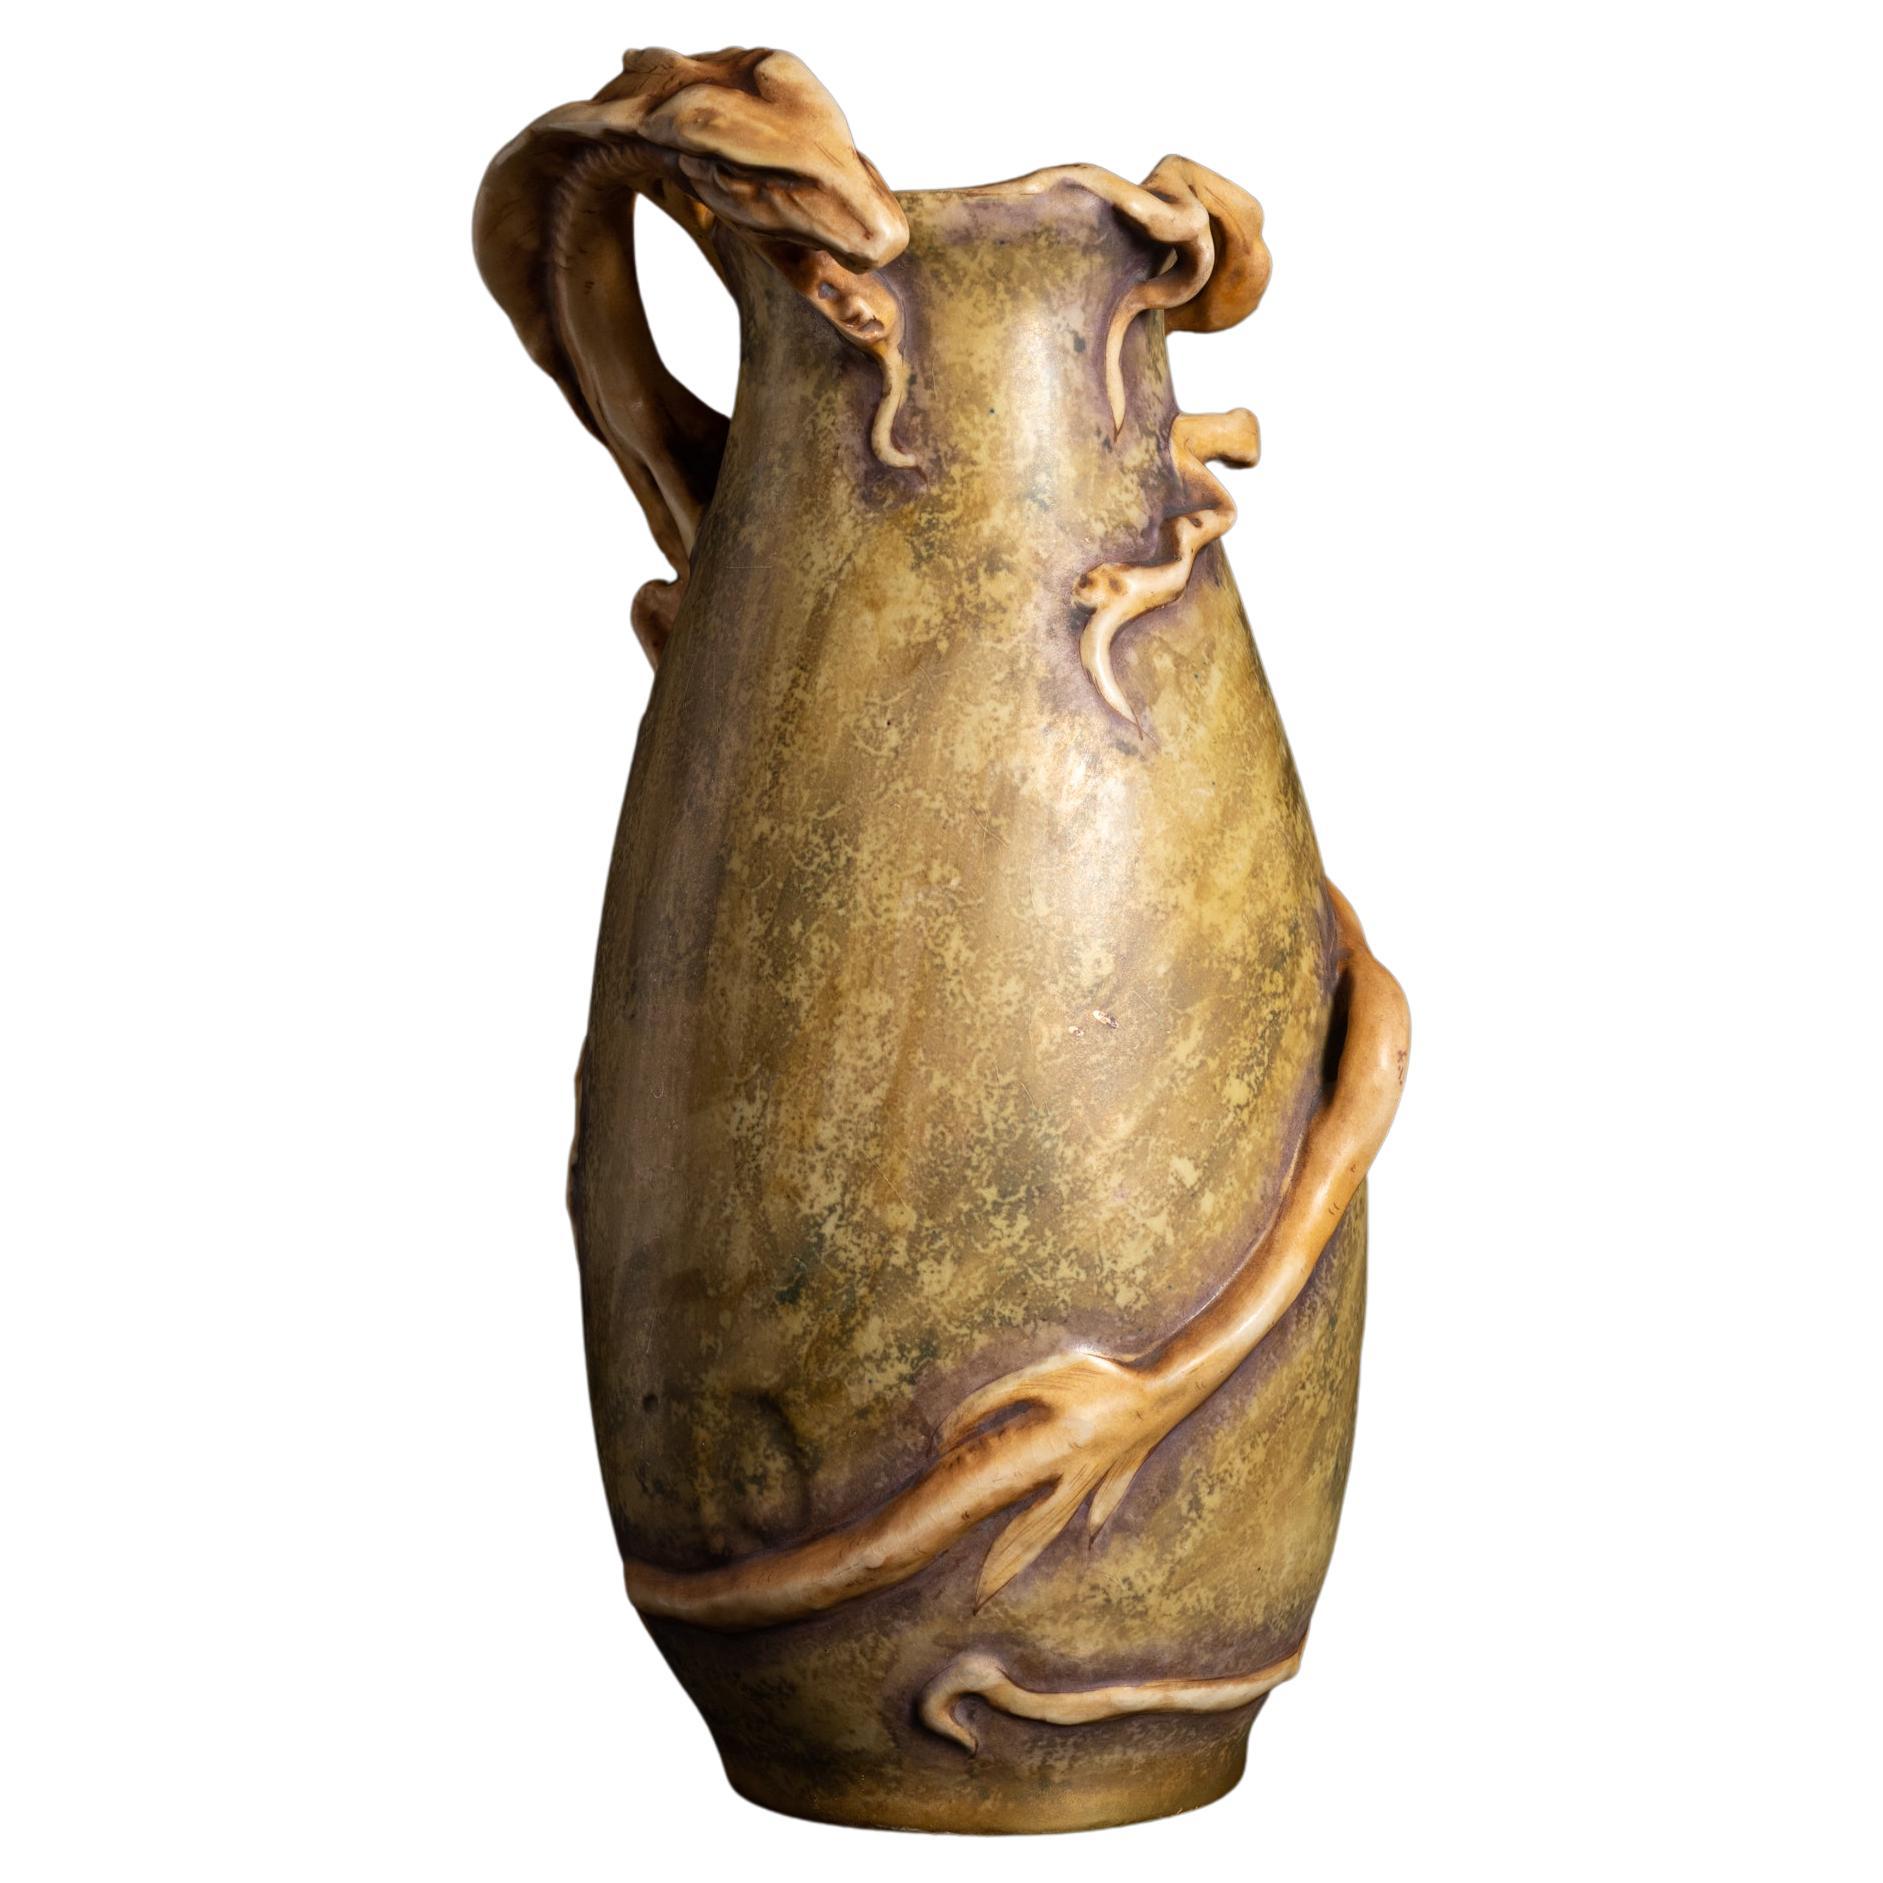 Art Nouveau Angry Web-Footed Sea Monster Vase by Eduard Stellmacher for Amphora